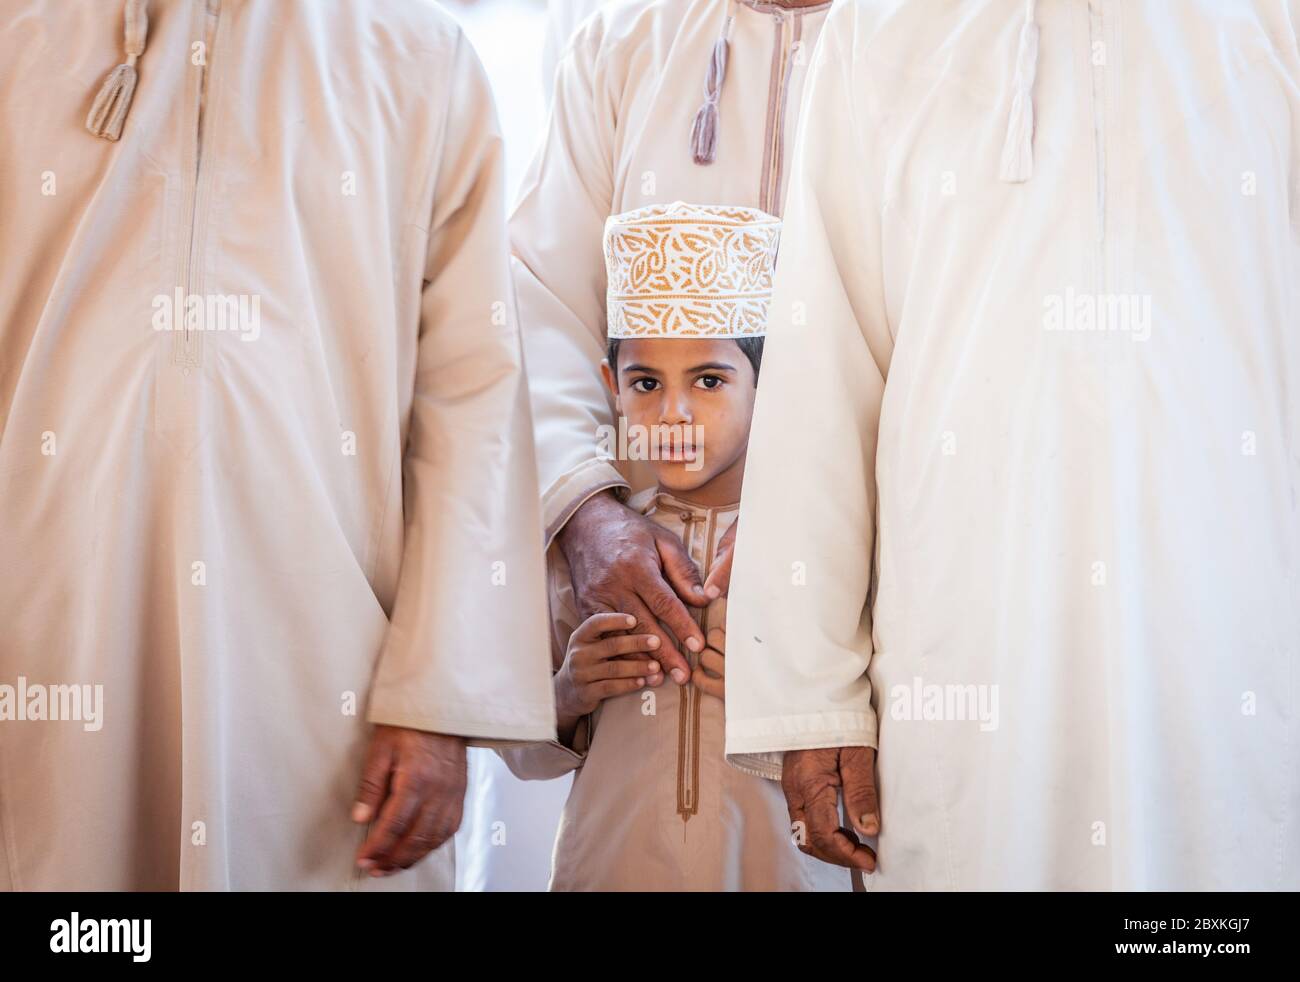 Nizwa, Oman, December 2, 2016: Portrait of a local boy in traditional clothes at the Friday goat market in Nizwa, Oman Stock Photo